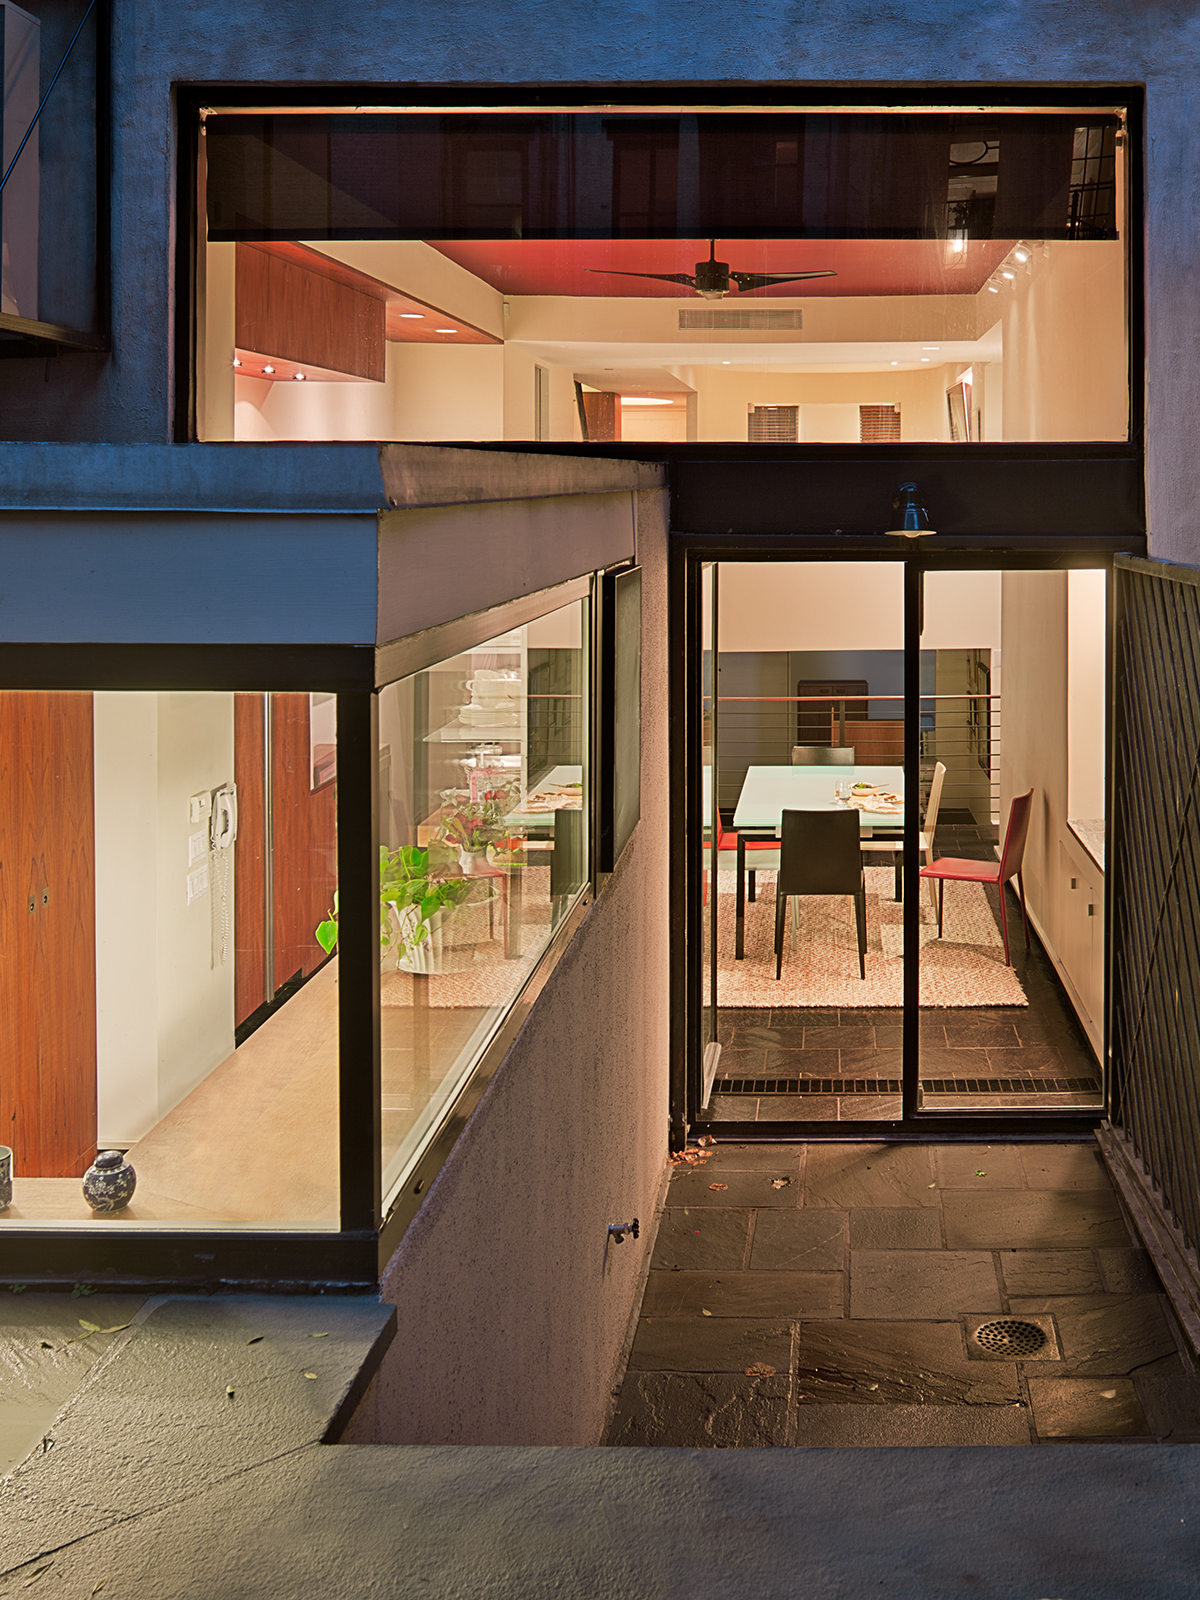 At dusk, the house glows; the galley Kitchen projects out from the double-height glass facade of the rear of the townhouse.